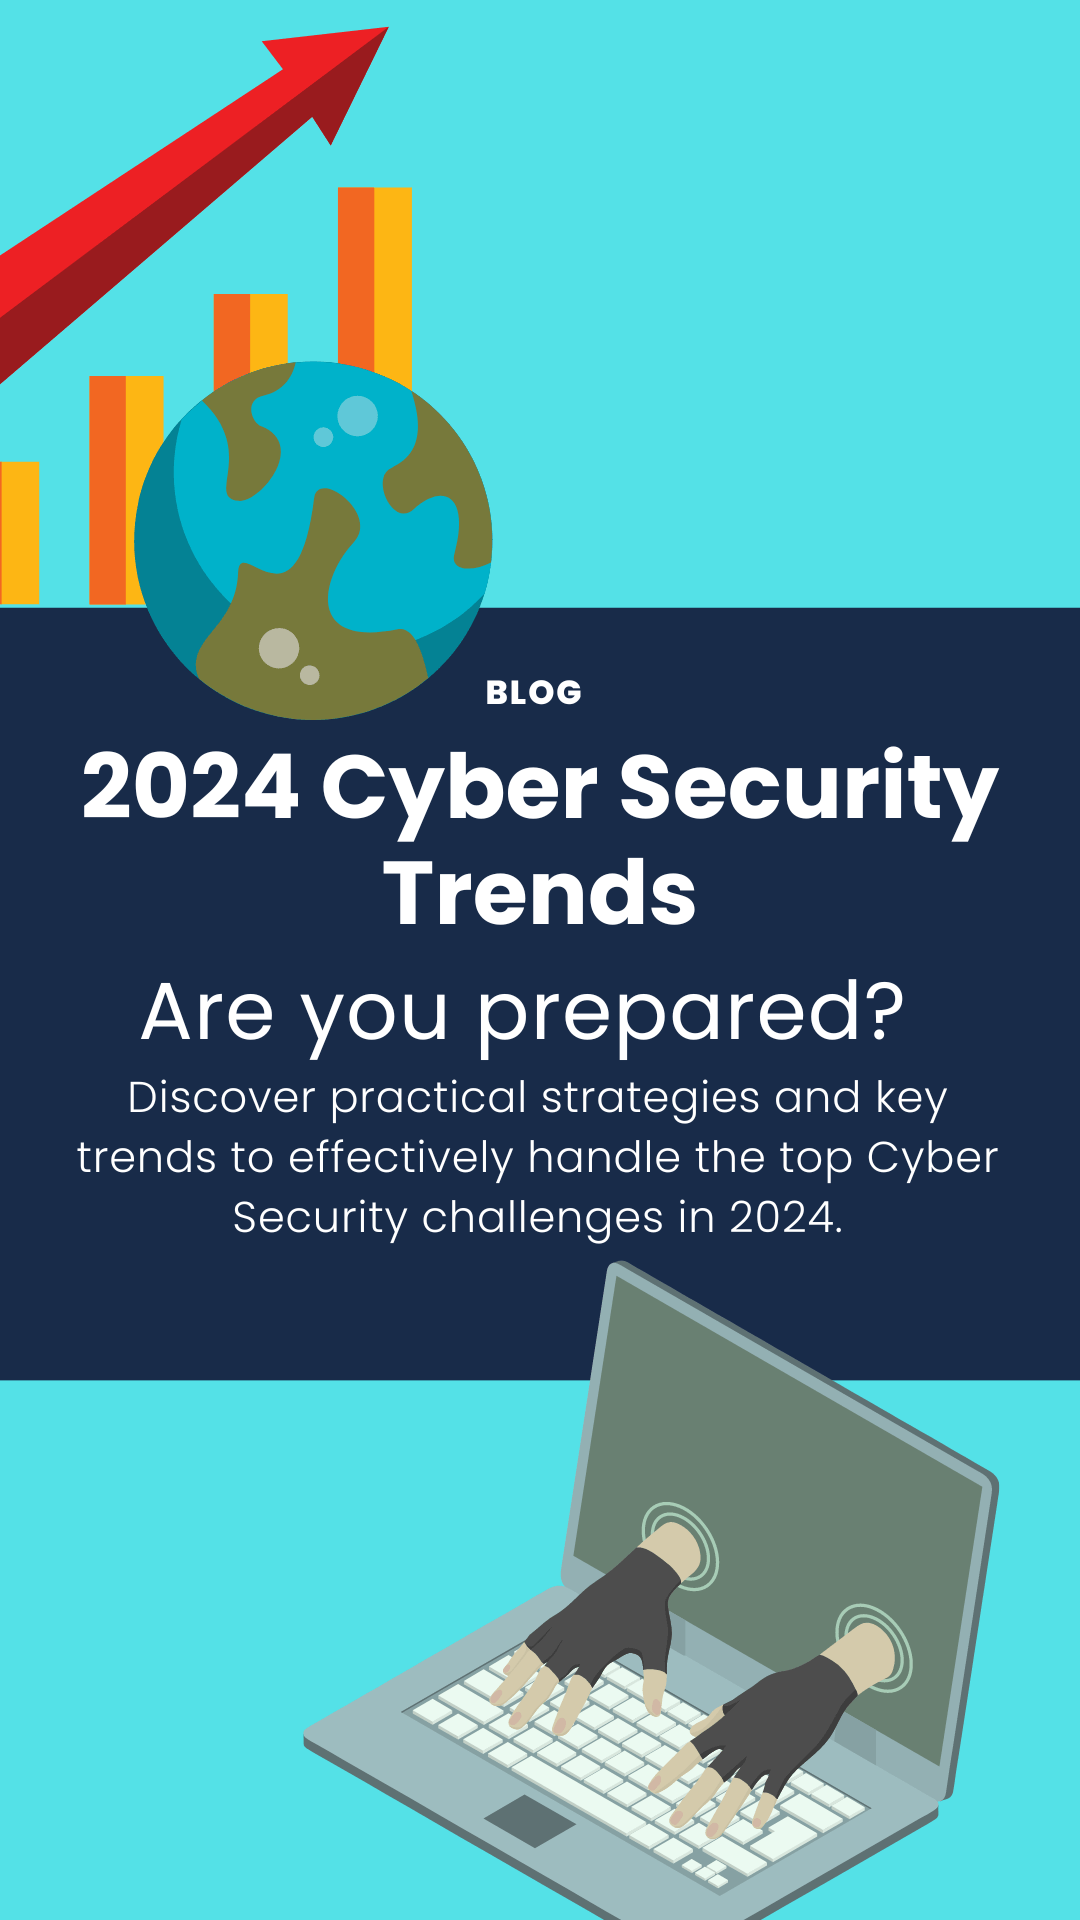 Cyber Security trends 2024 blog image